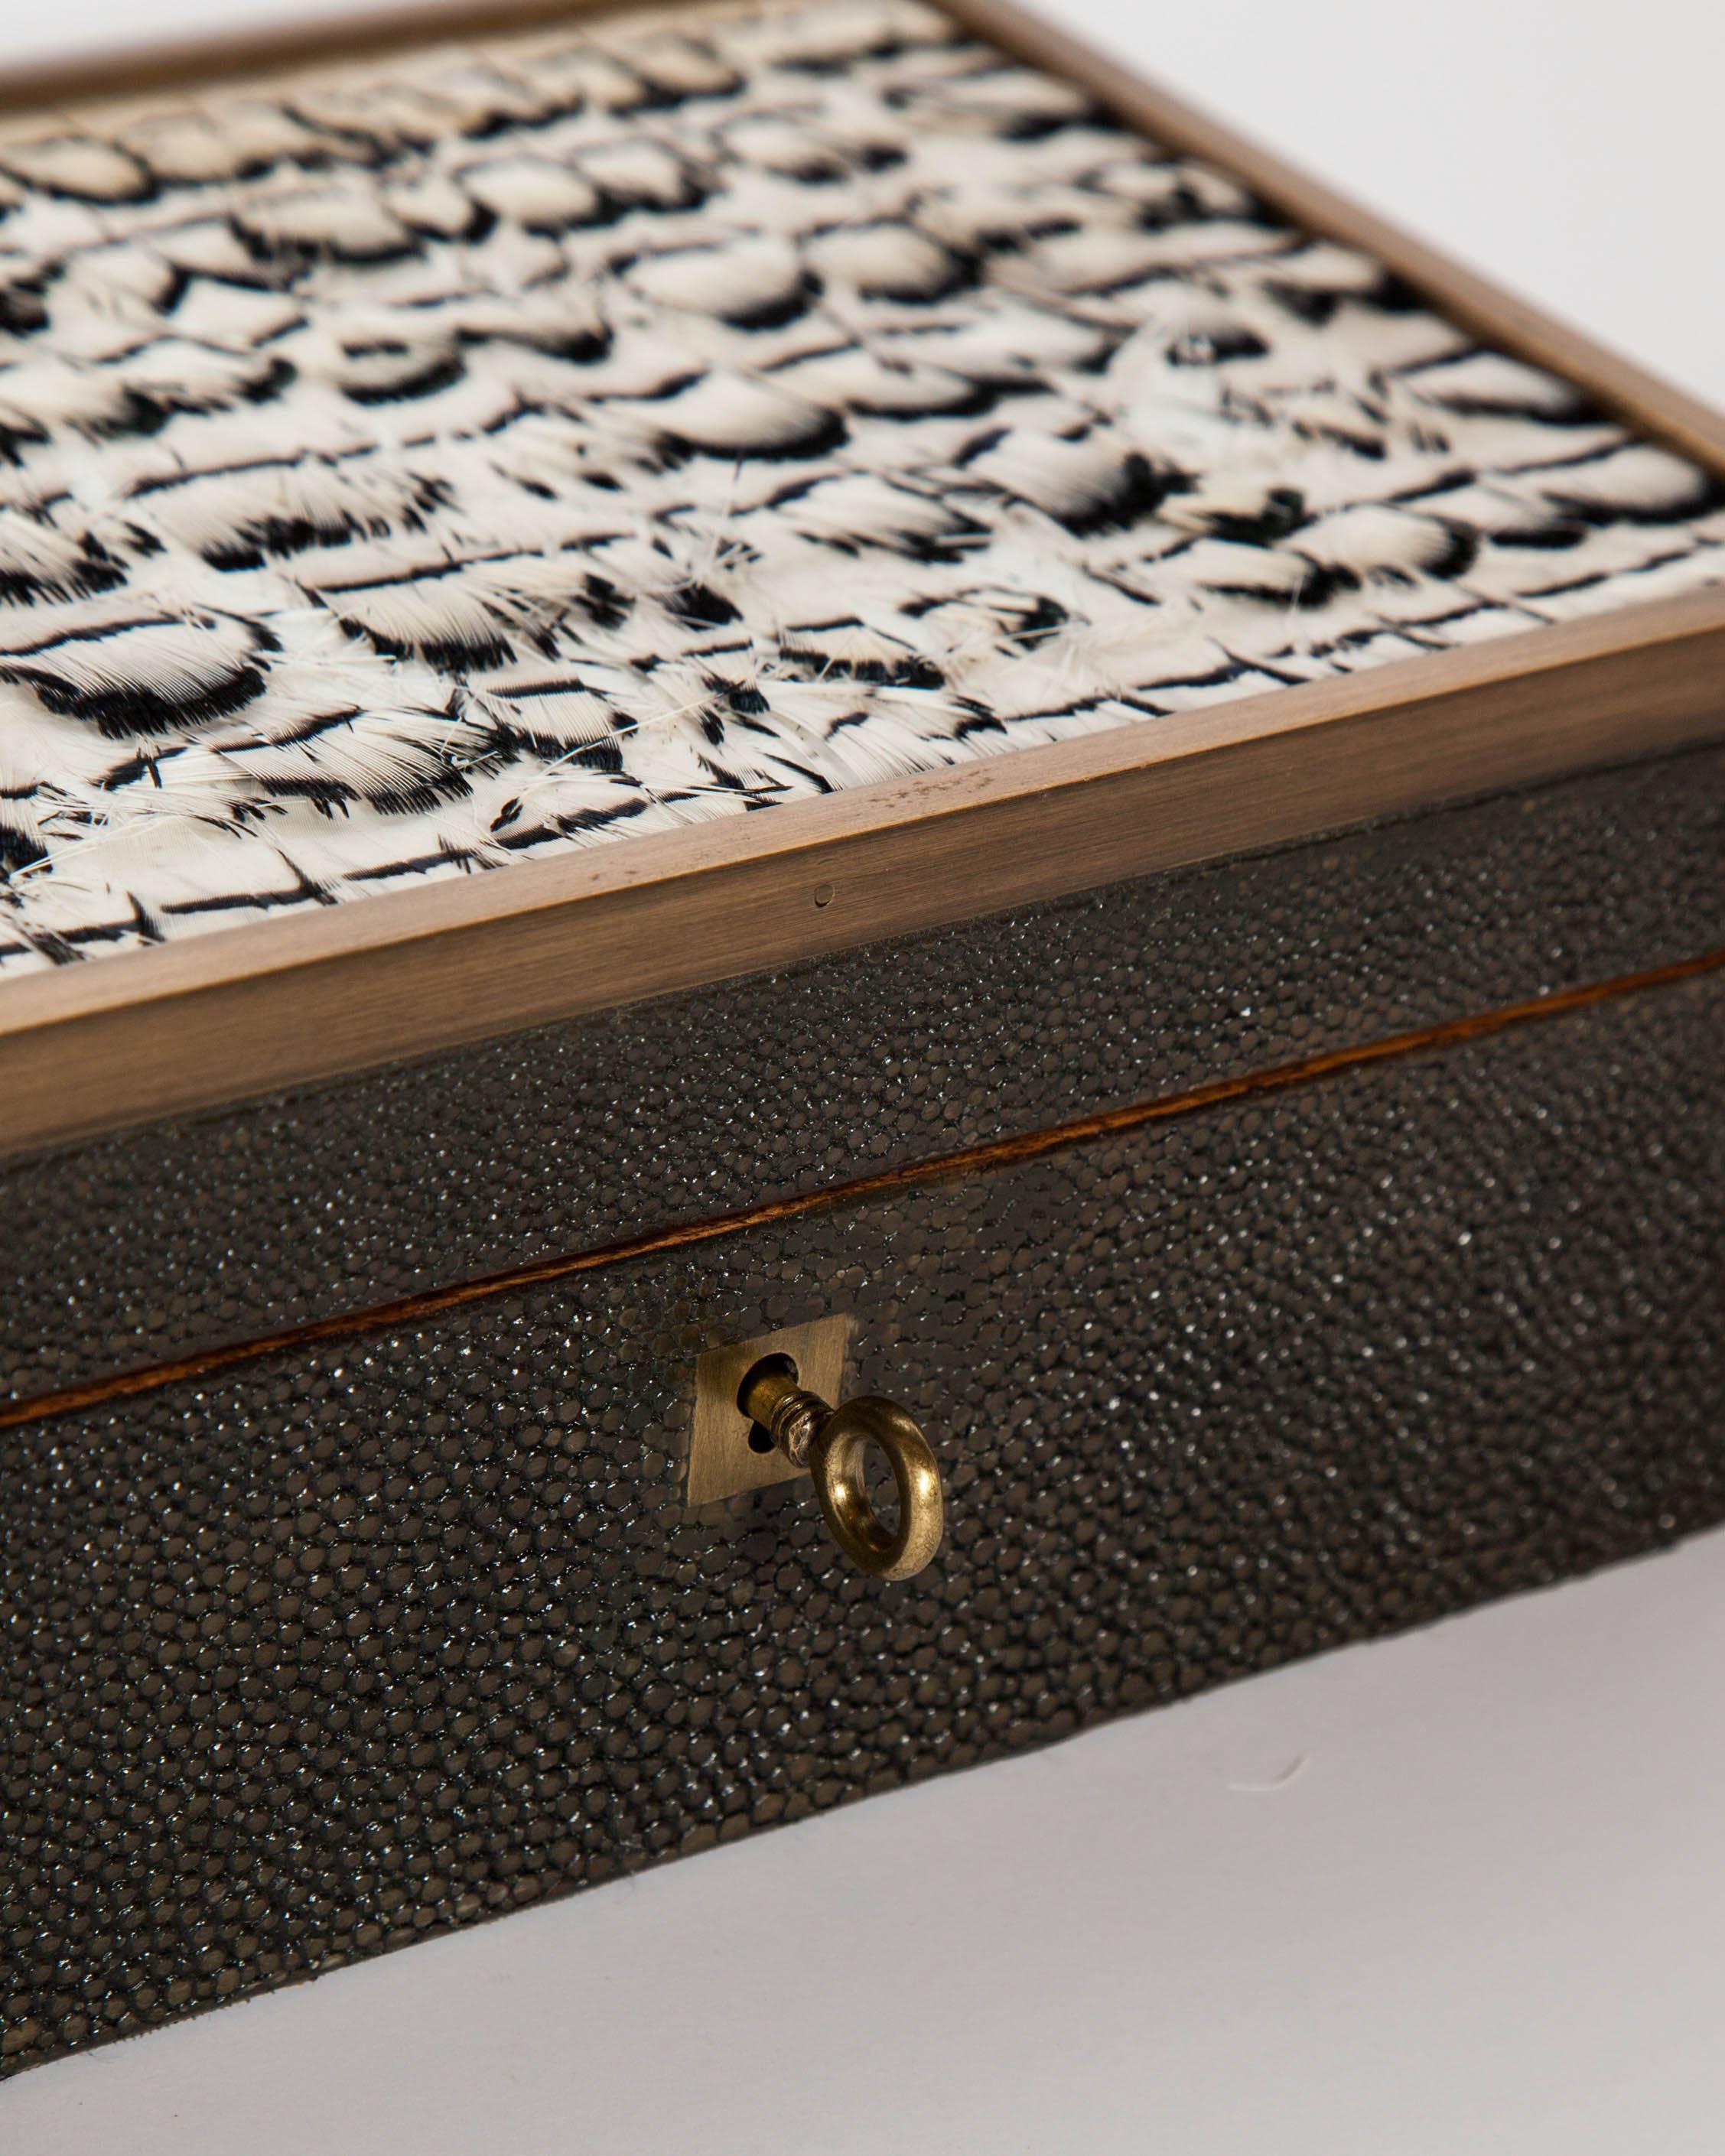 Contemporary Genuine Shagreen Jewelry Box with Exotic Feather Accents